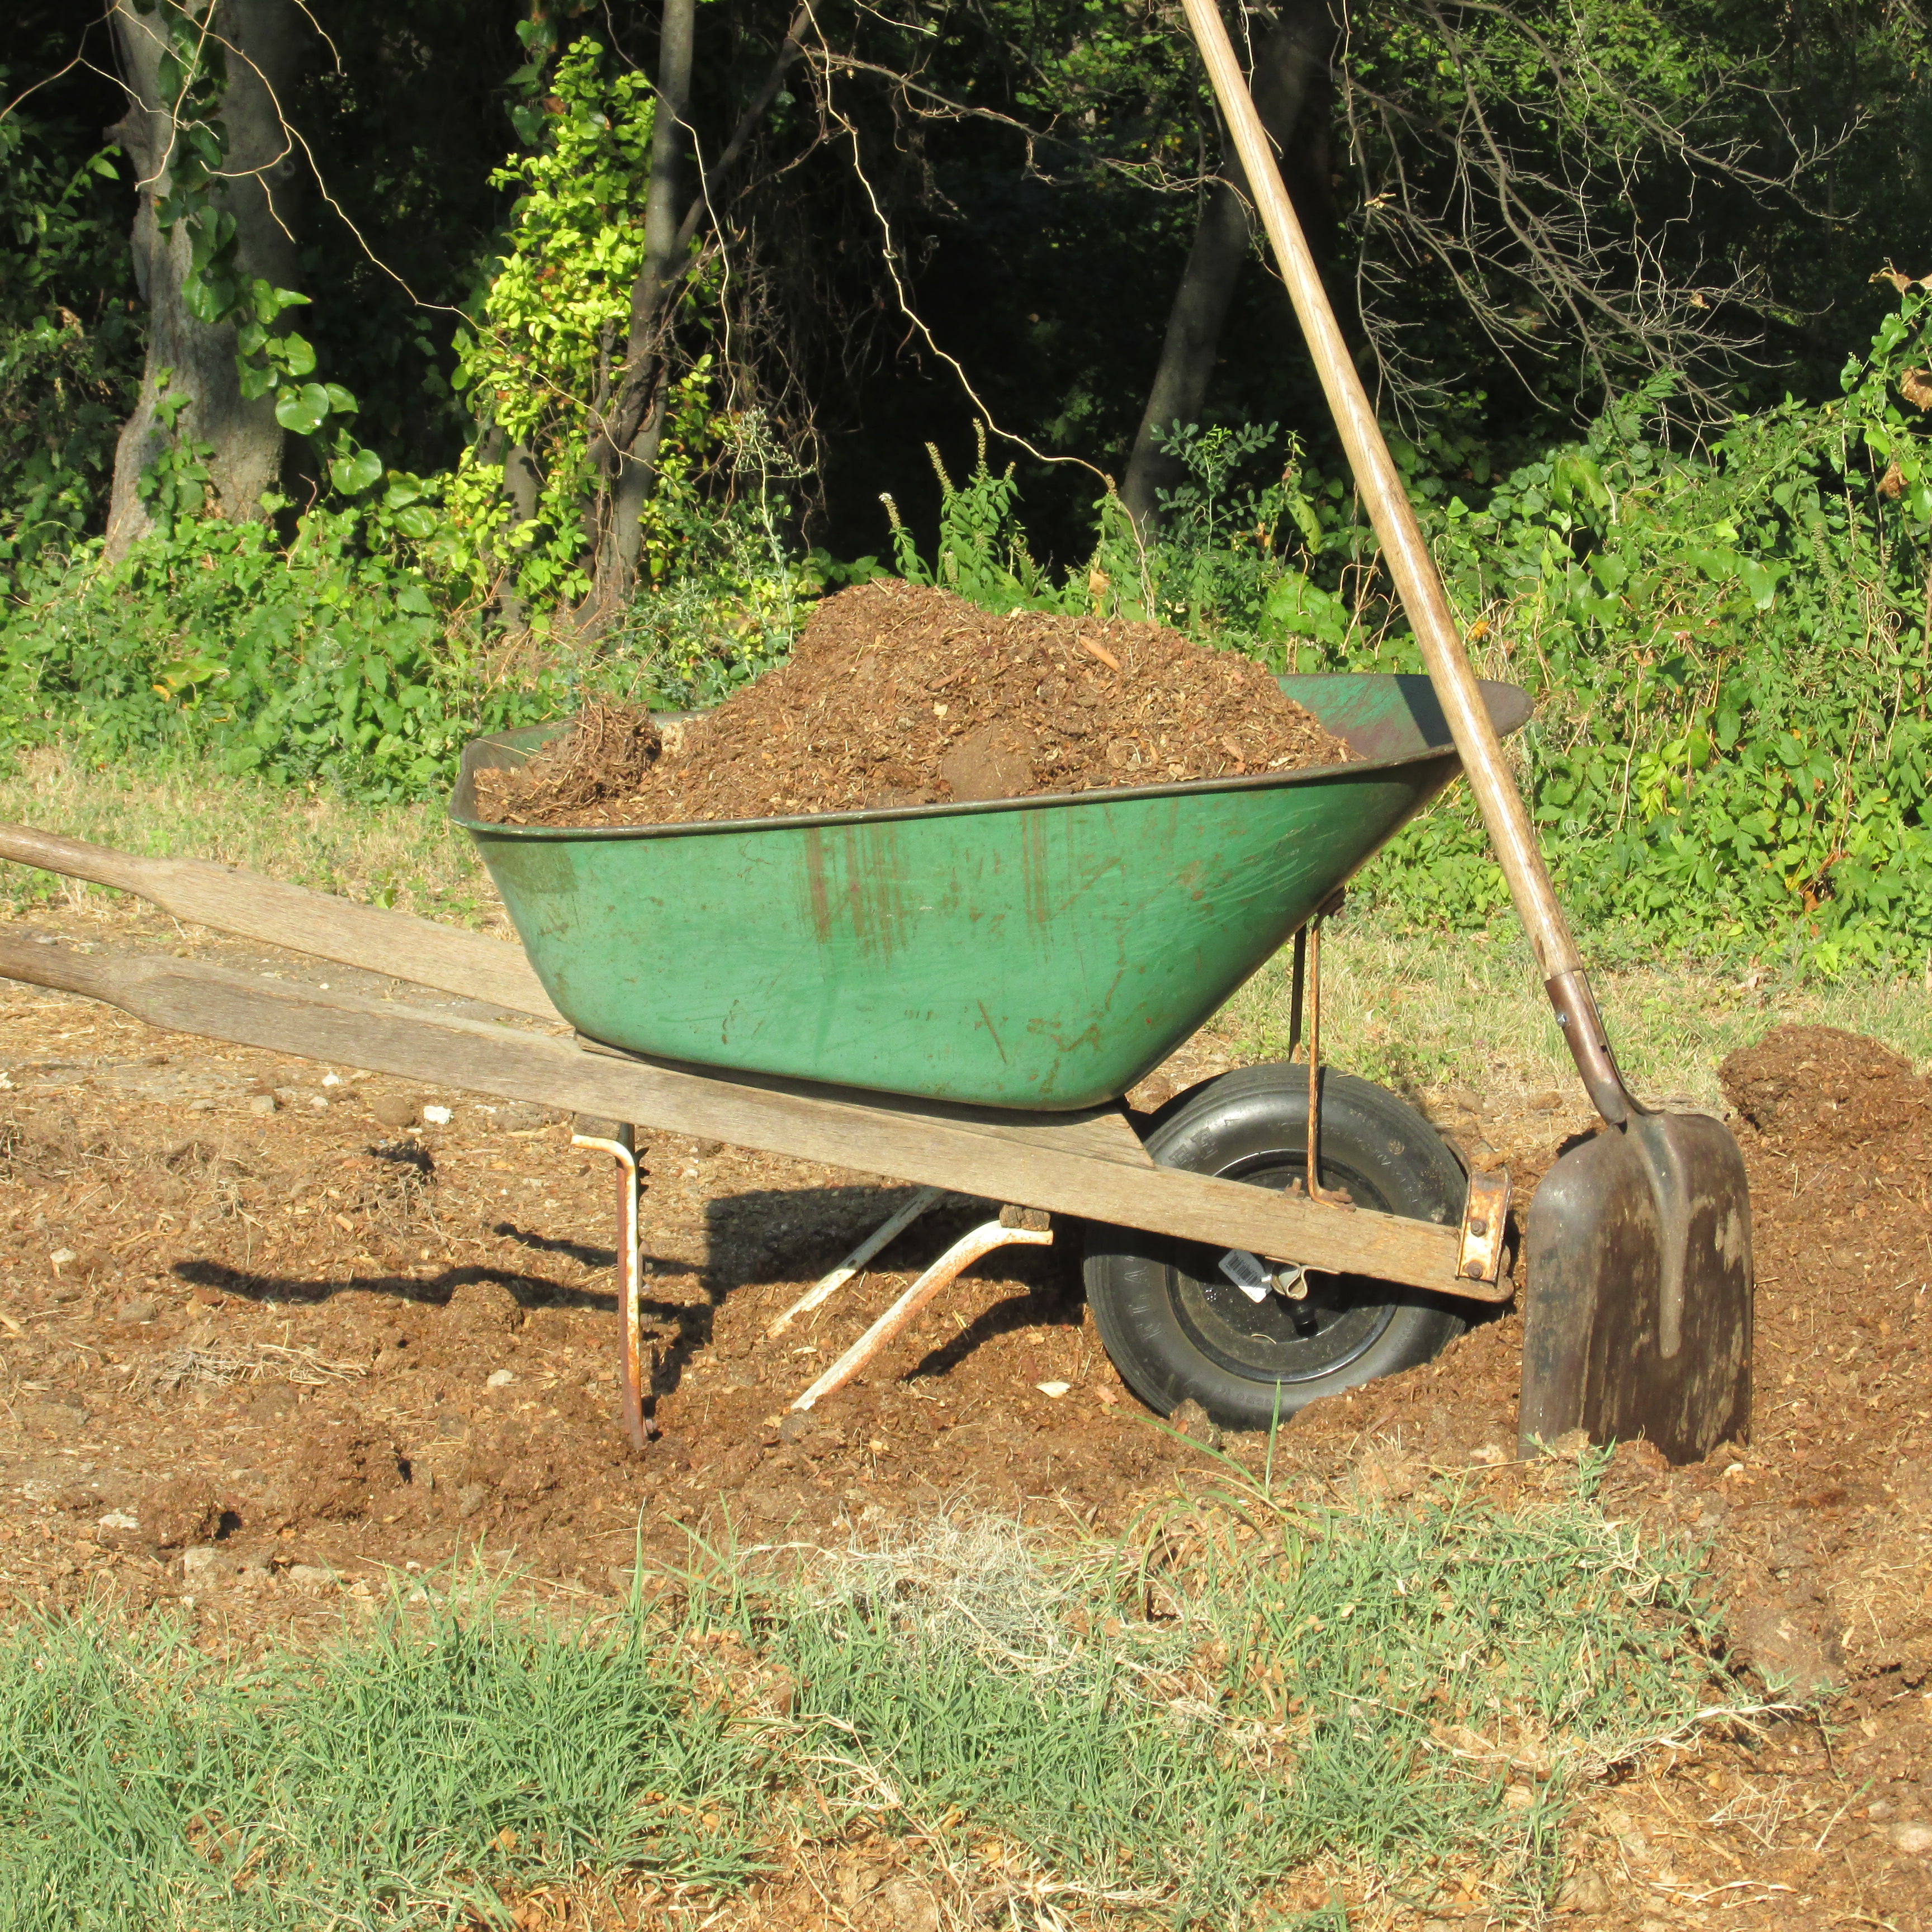 Killer Compost Why I Am Saying Goodbye To Composted Manure